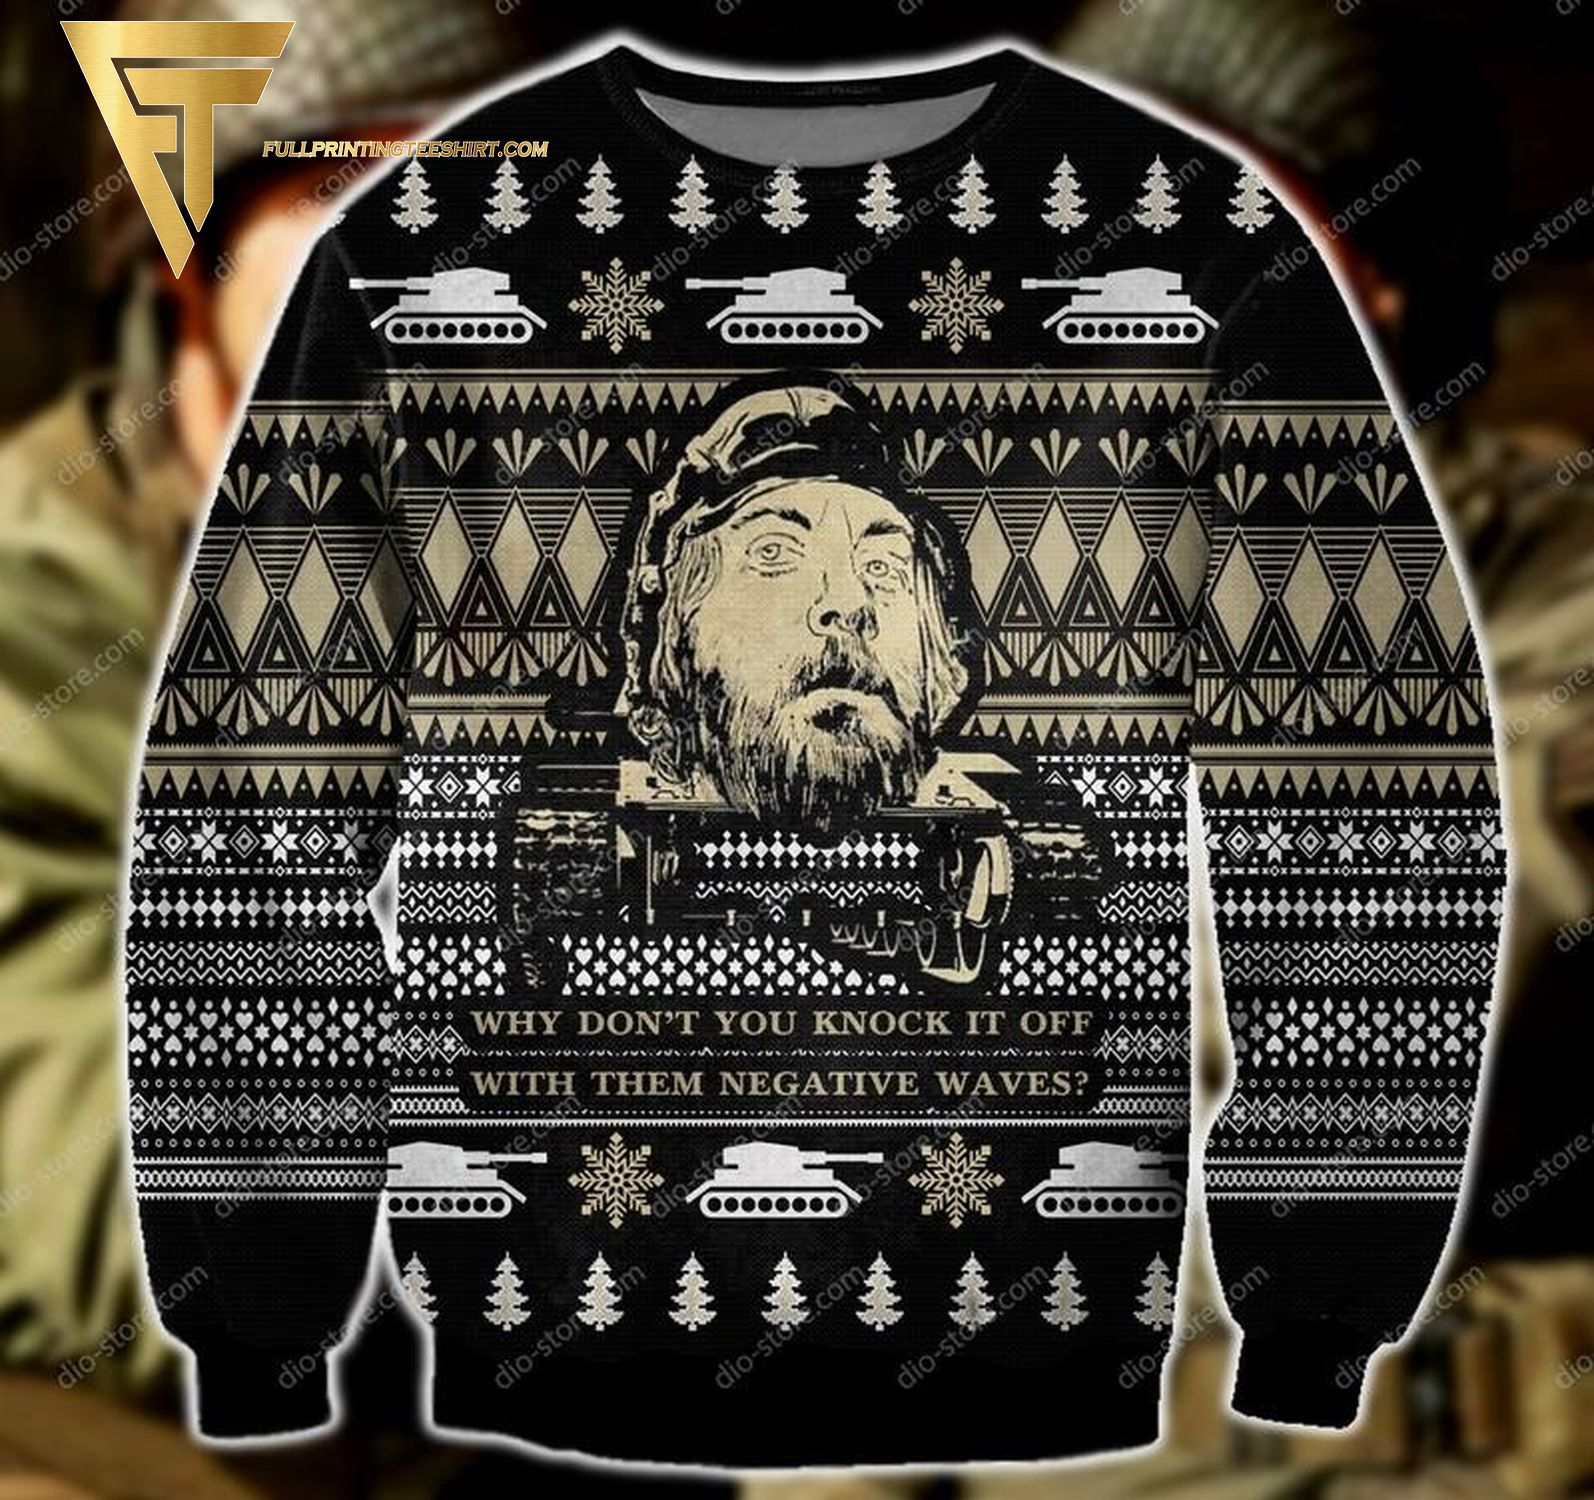 Kelly's Heroes Full Print Ugly Christmas Sweater